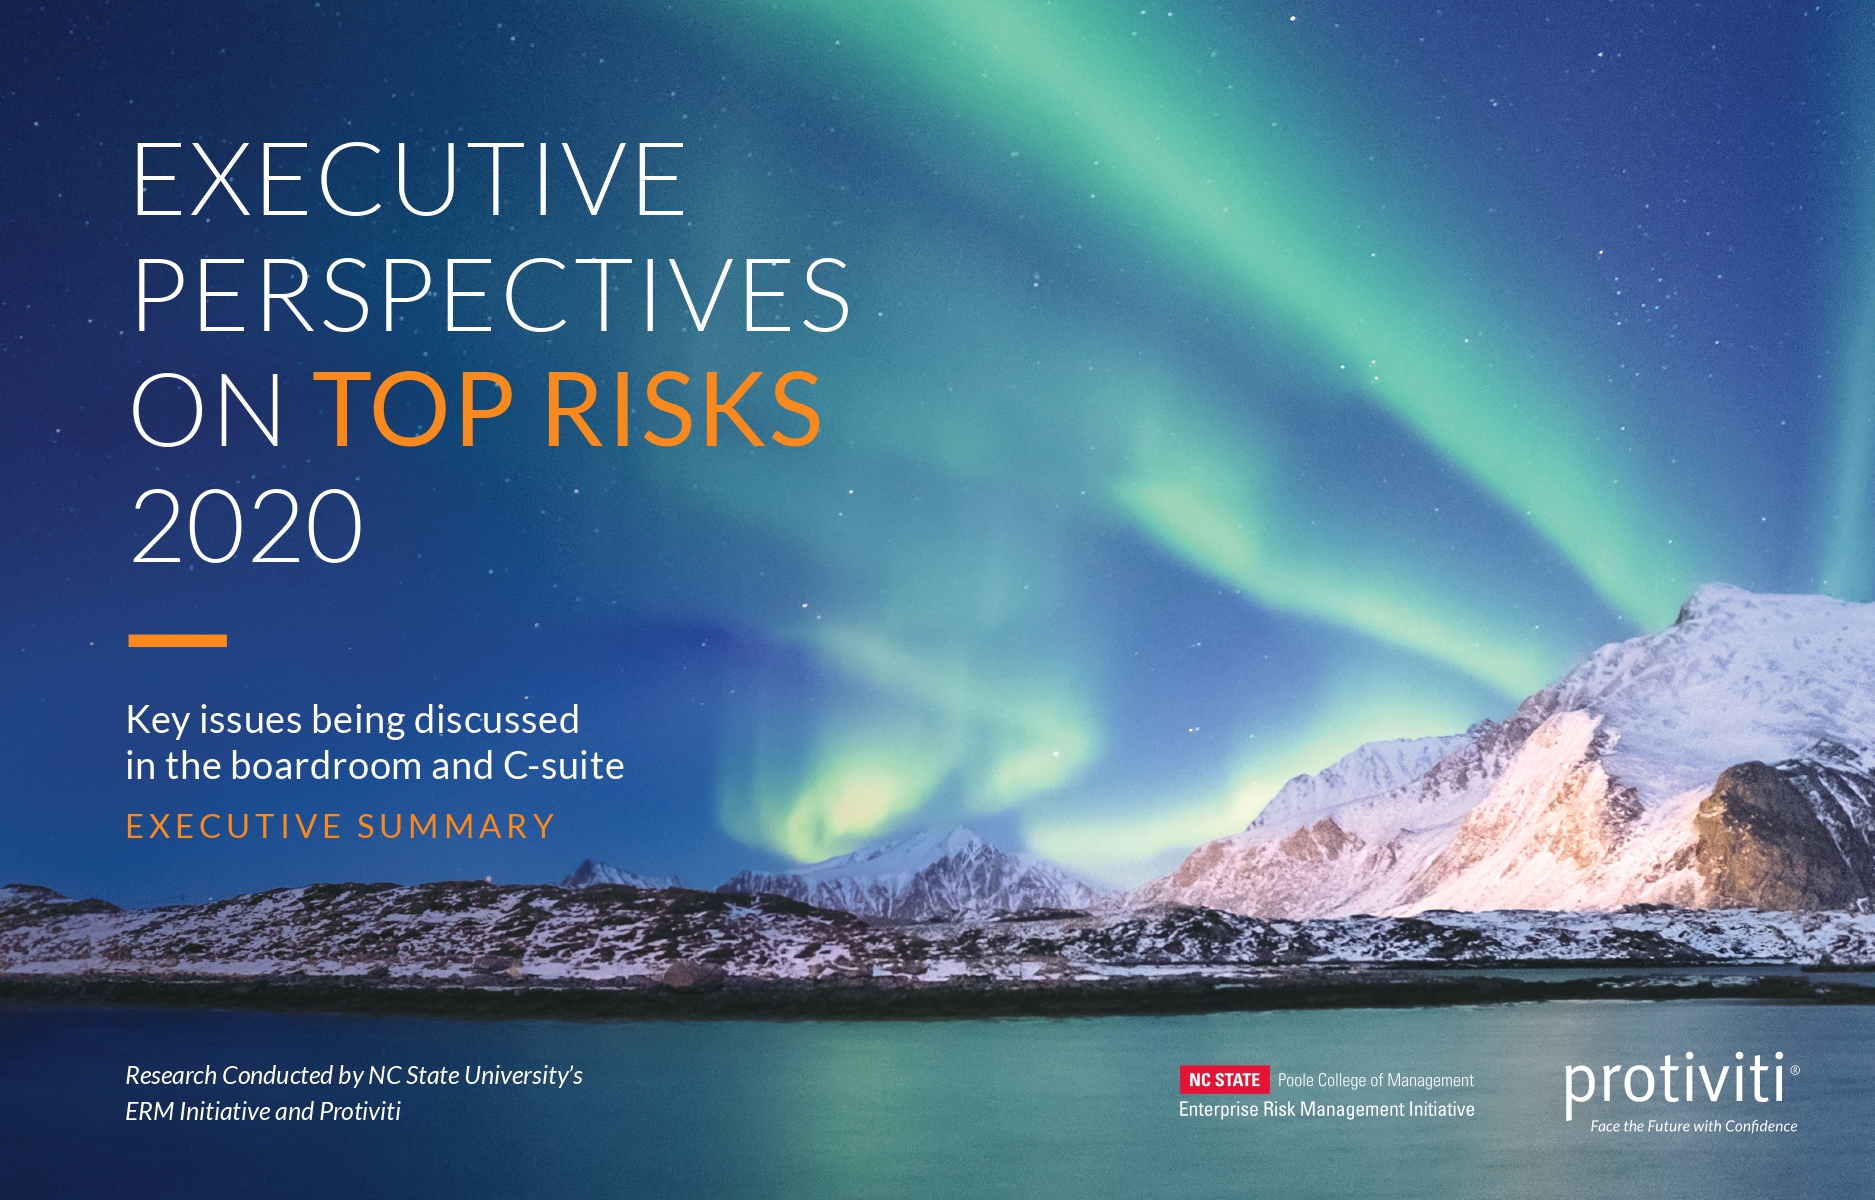 Screenshot of the first page of Executive Perspectives on Top Risks in 2020